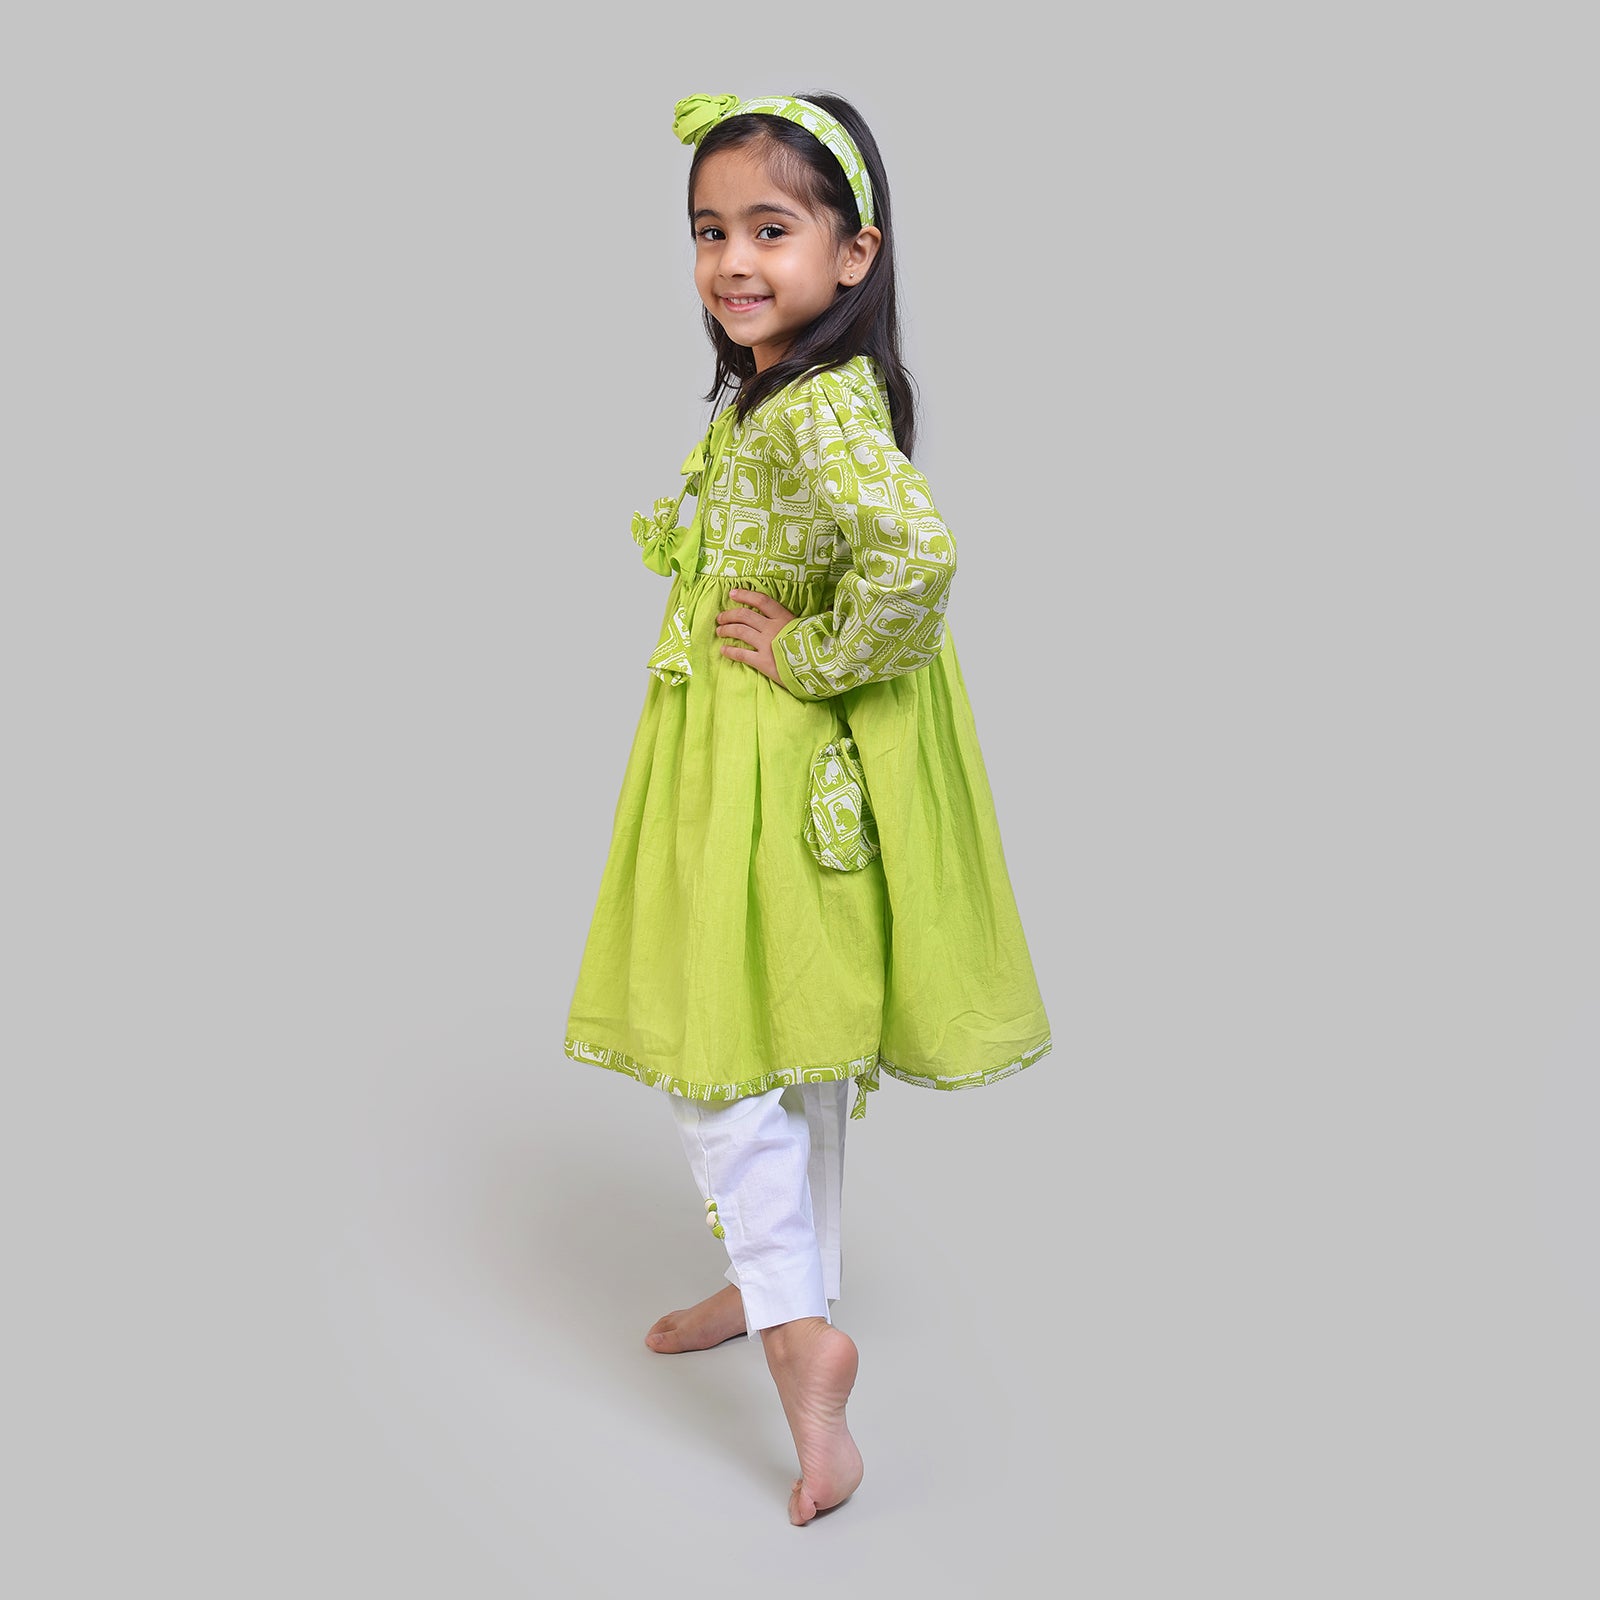 Cotton Full Sleeve Round Neck Kurta with Side Pockets And White Pants For Girls with The Monkey & The Crocodile Print